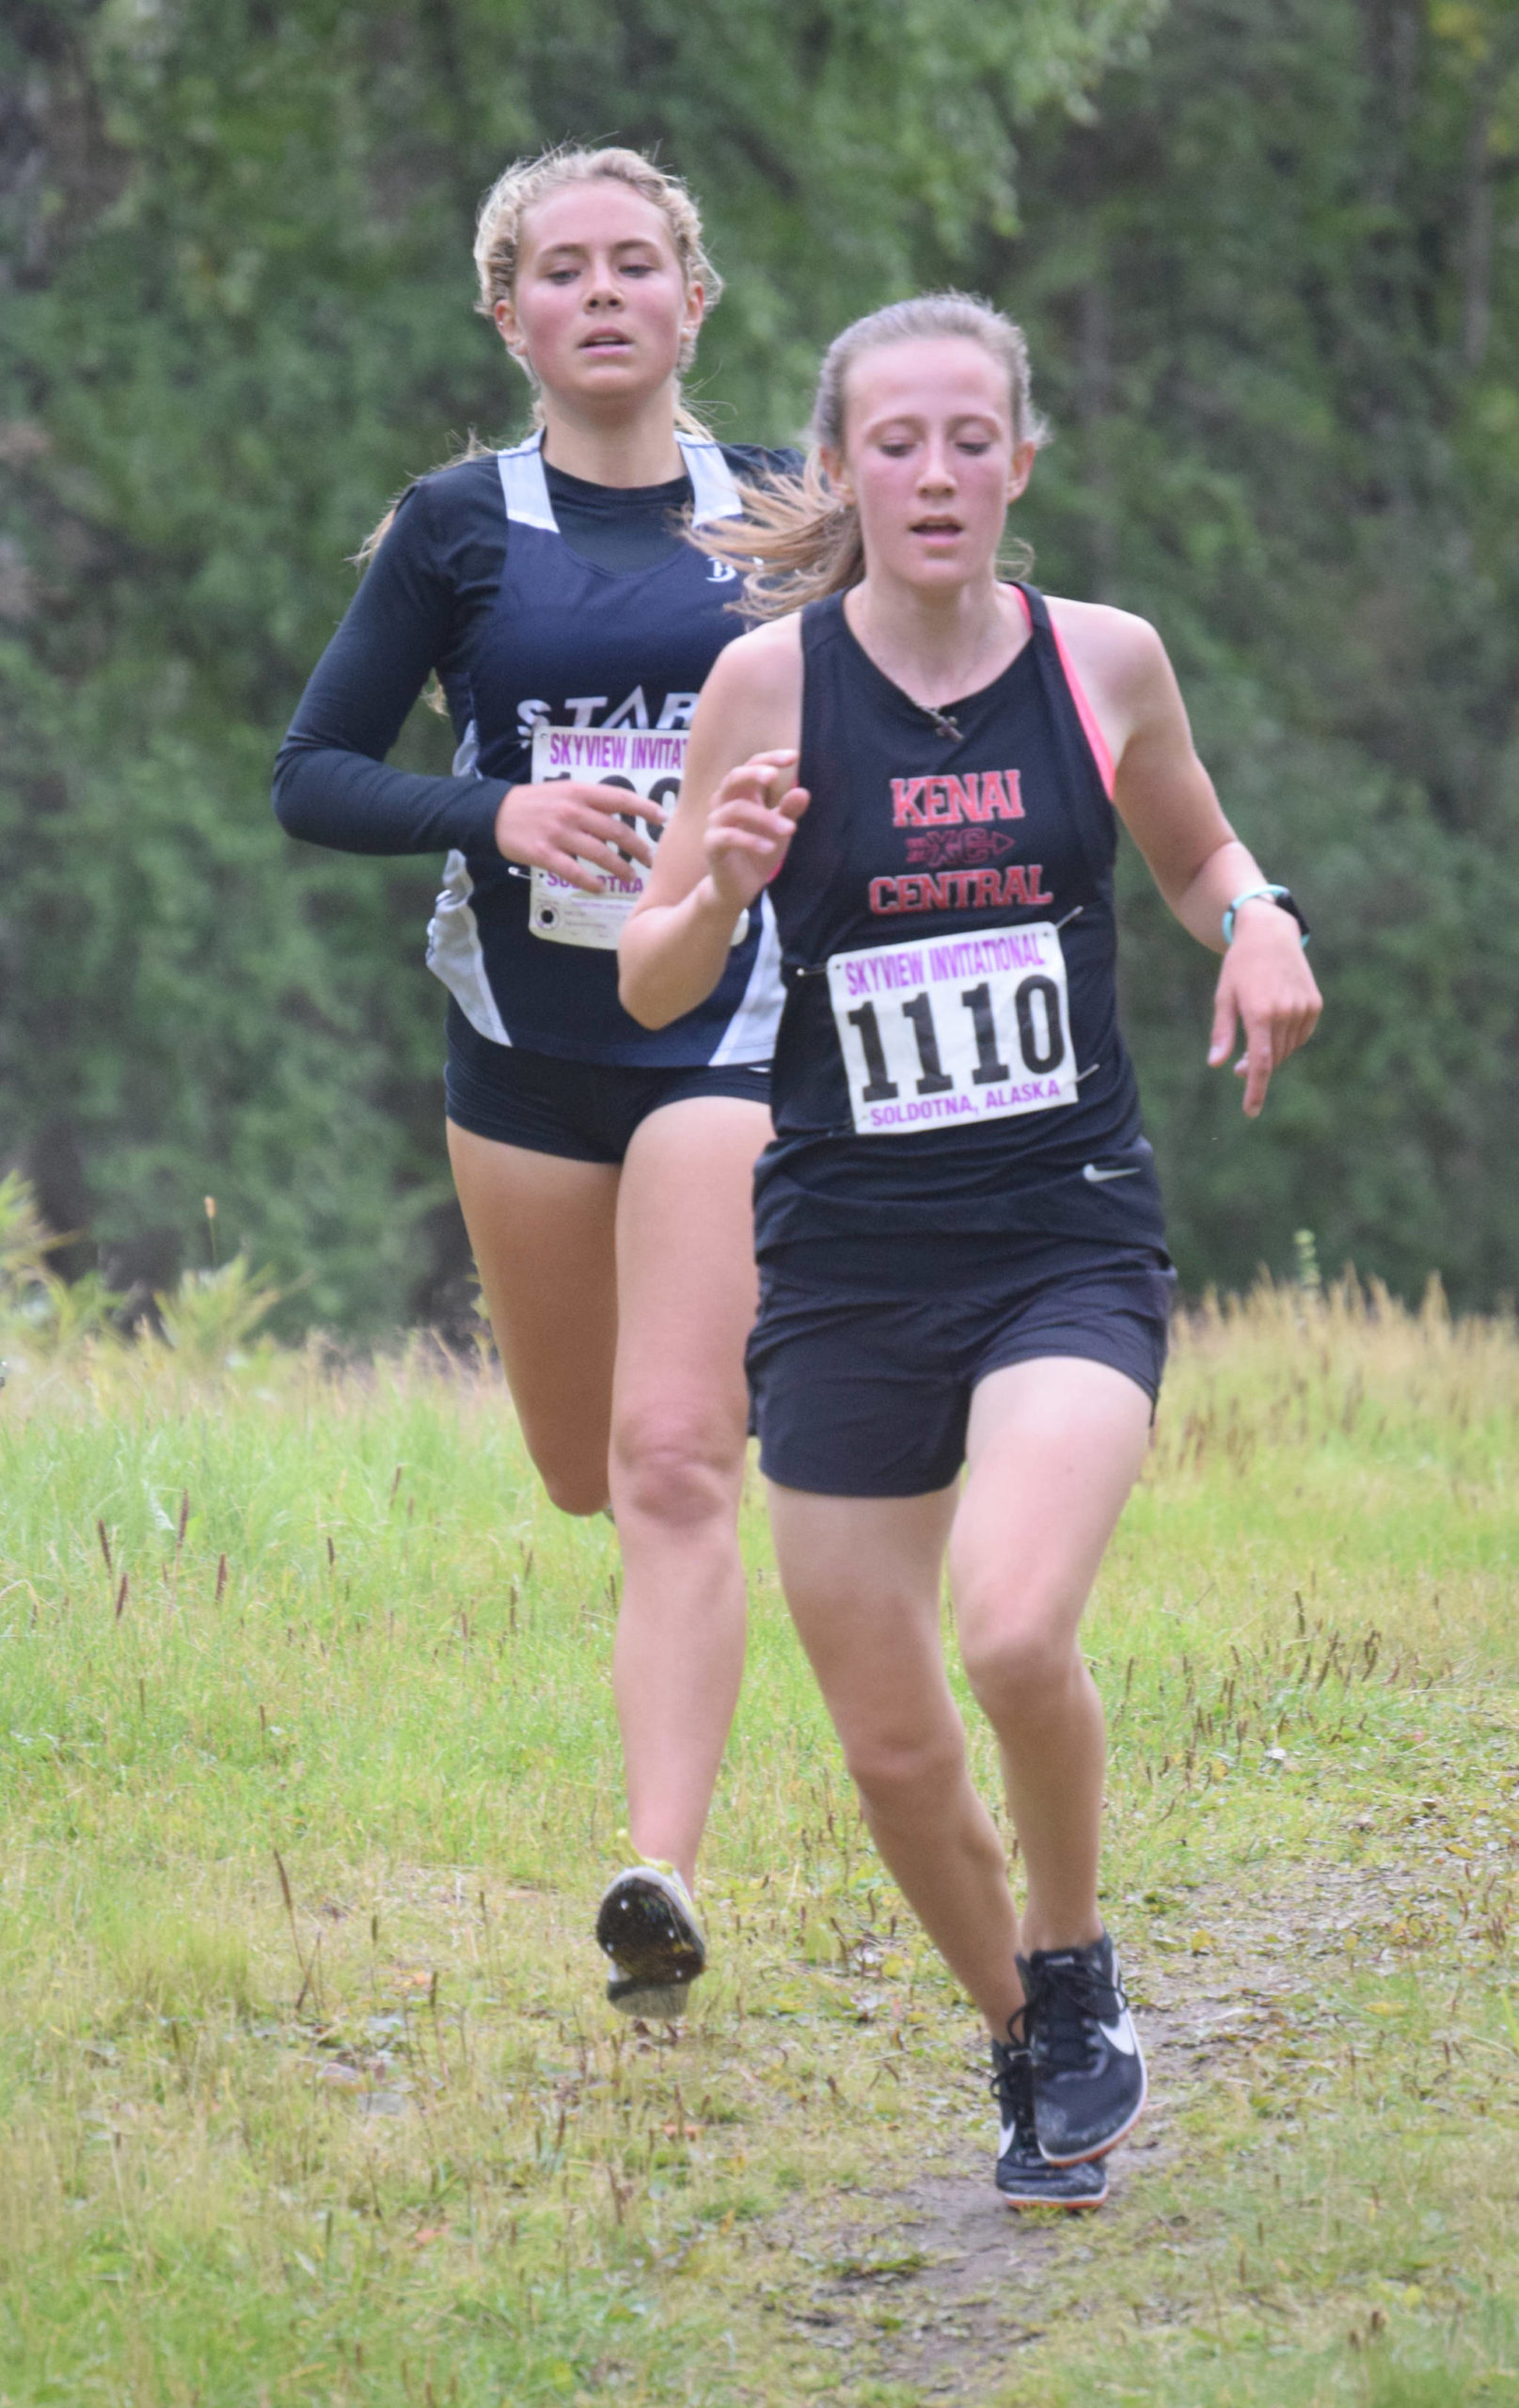 Soldotna’s Jordan Strausbaugh tries to find a way around Kenai Central’s Jayna Boonstra on Wednesday, Sept. 1, 2021, at the Kenai-Soldotna dual meet at Tsalteshi Trails just outside of Soldotna, Alaska. Boonstra was able to hang on for first place in the race. (Photo by Jeff Helminiak/Peninsula Clarion)